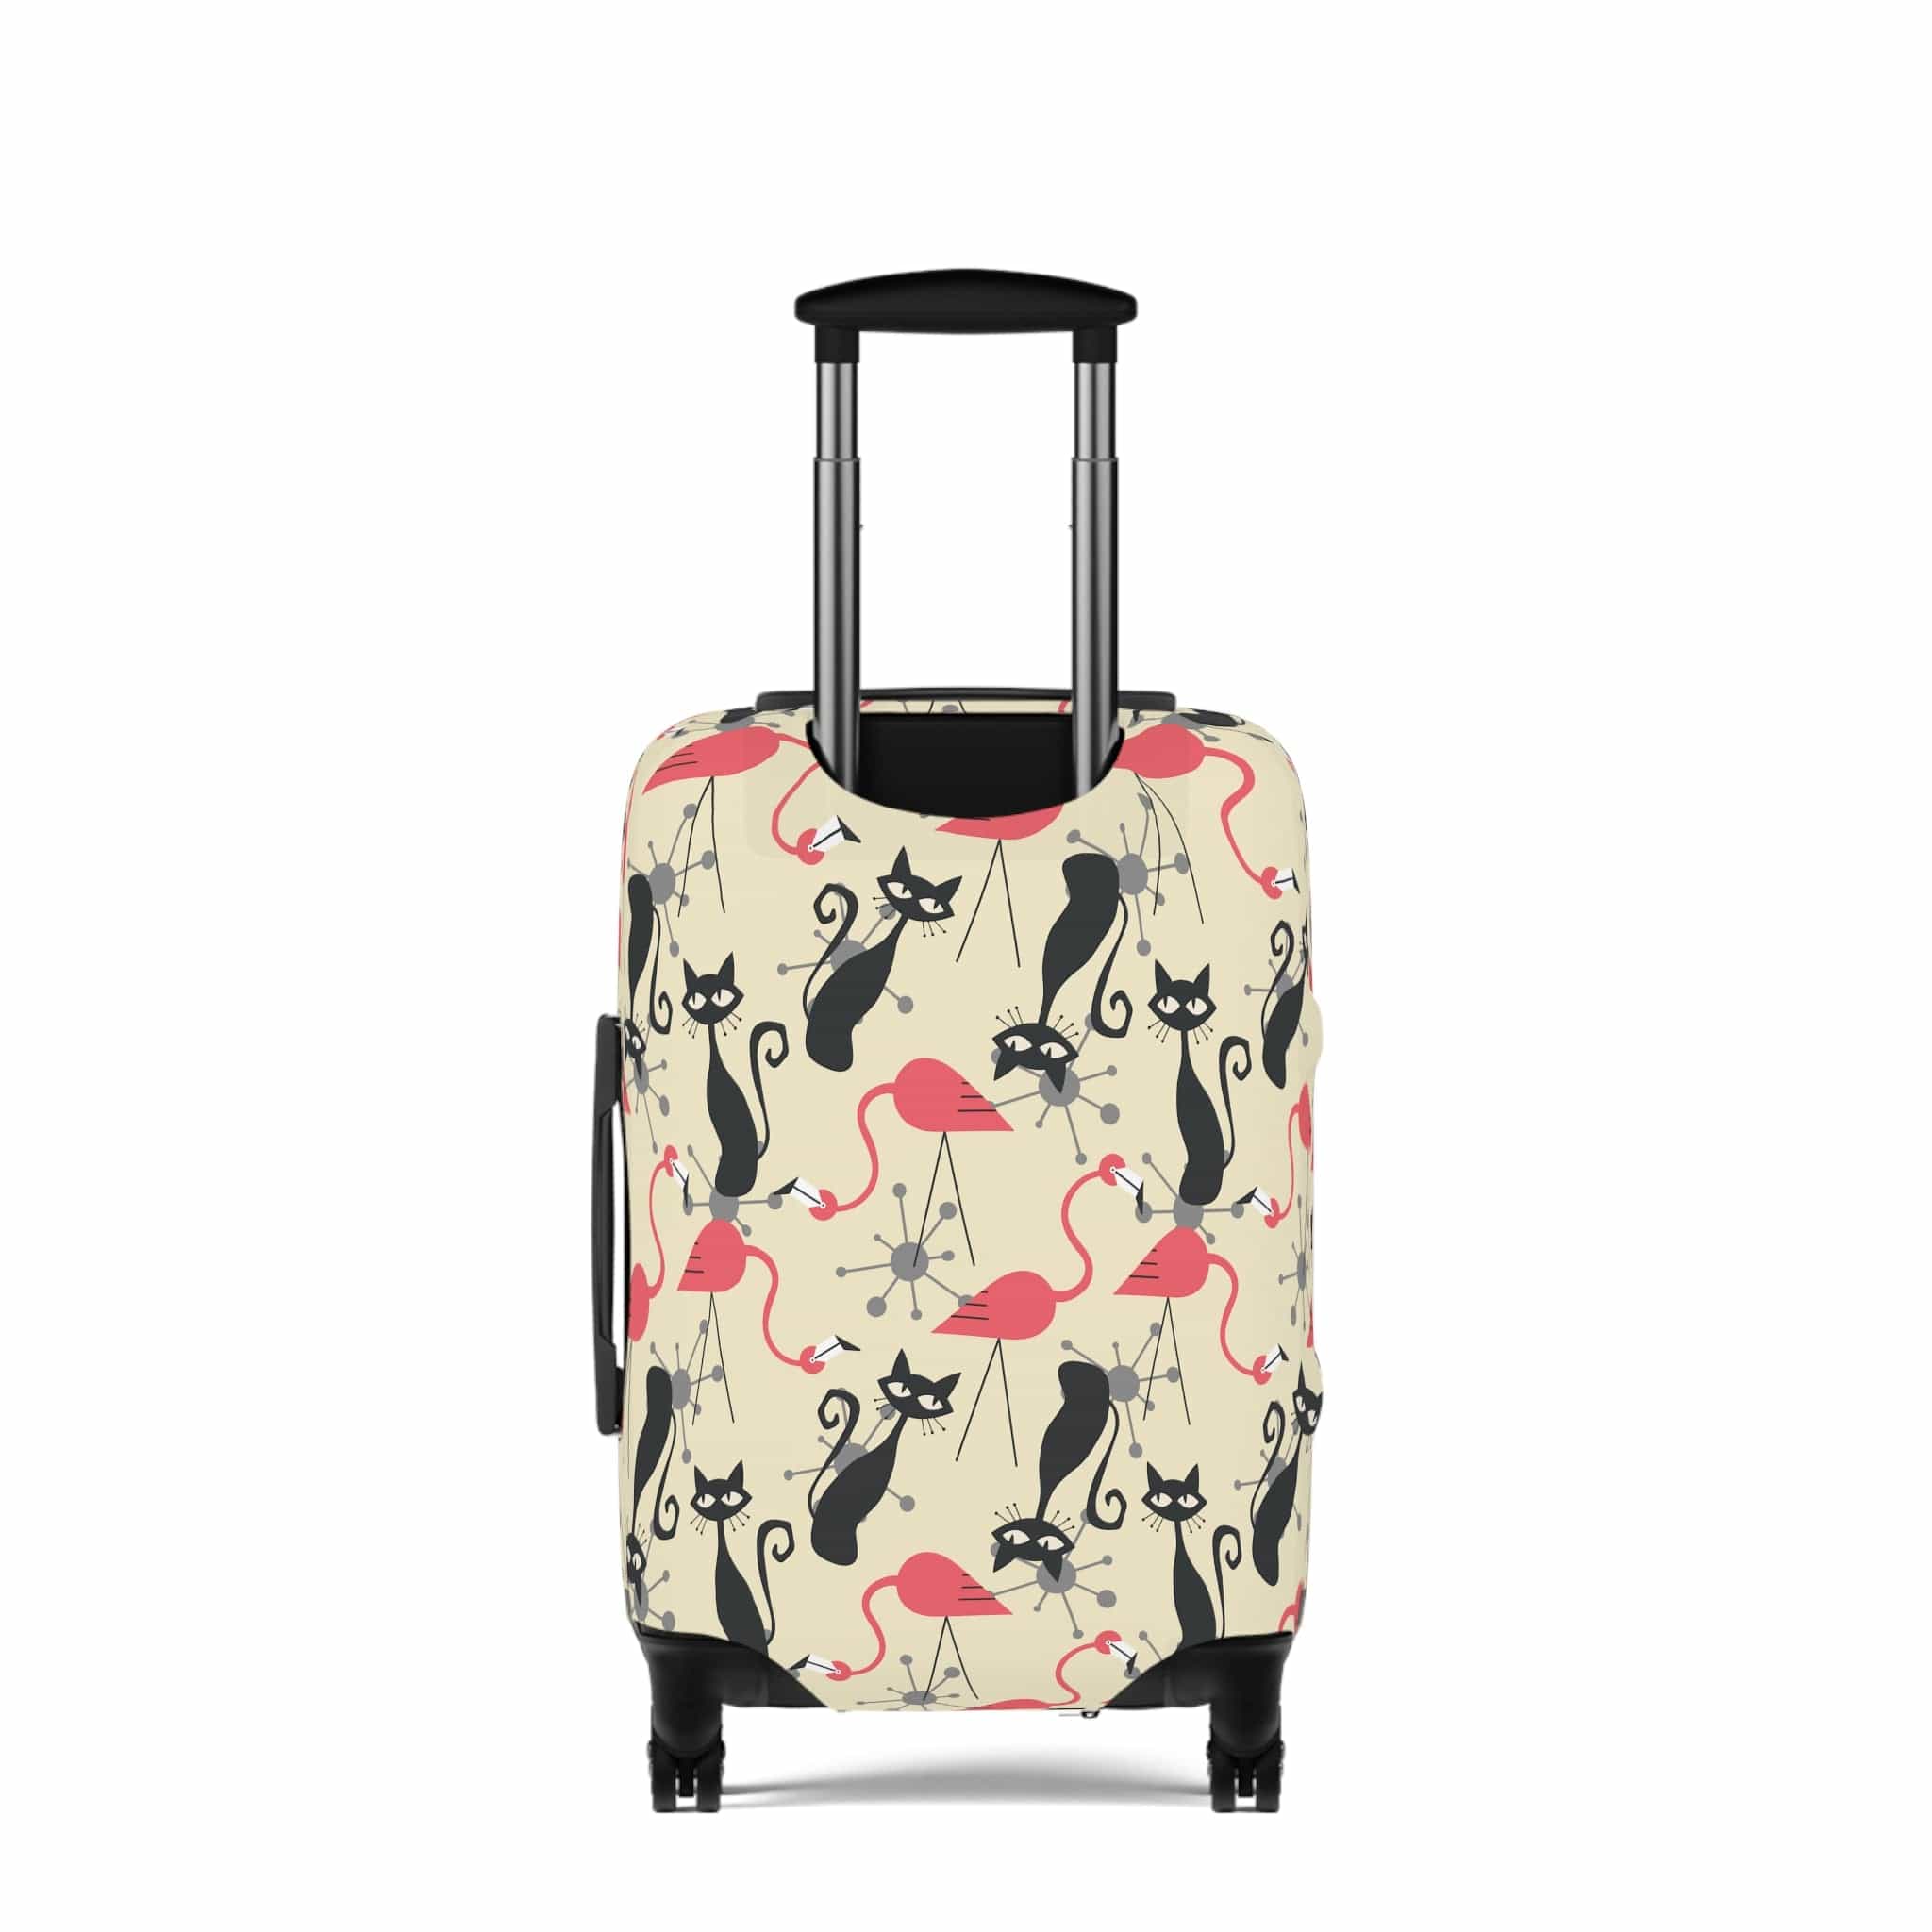 Printify Atomic Cat, Flamingo Mid Century Modern Luggage Cover, Retro Whimsy MCM Starburst Cream, Pink, Gray Suitcase Protector Accessories